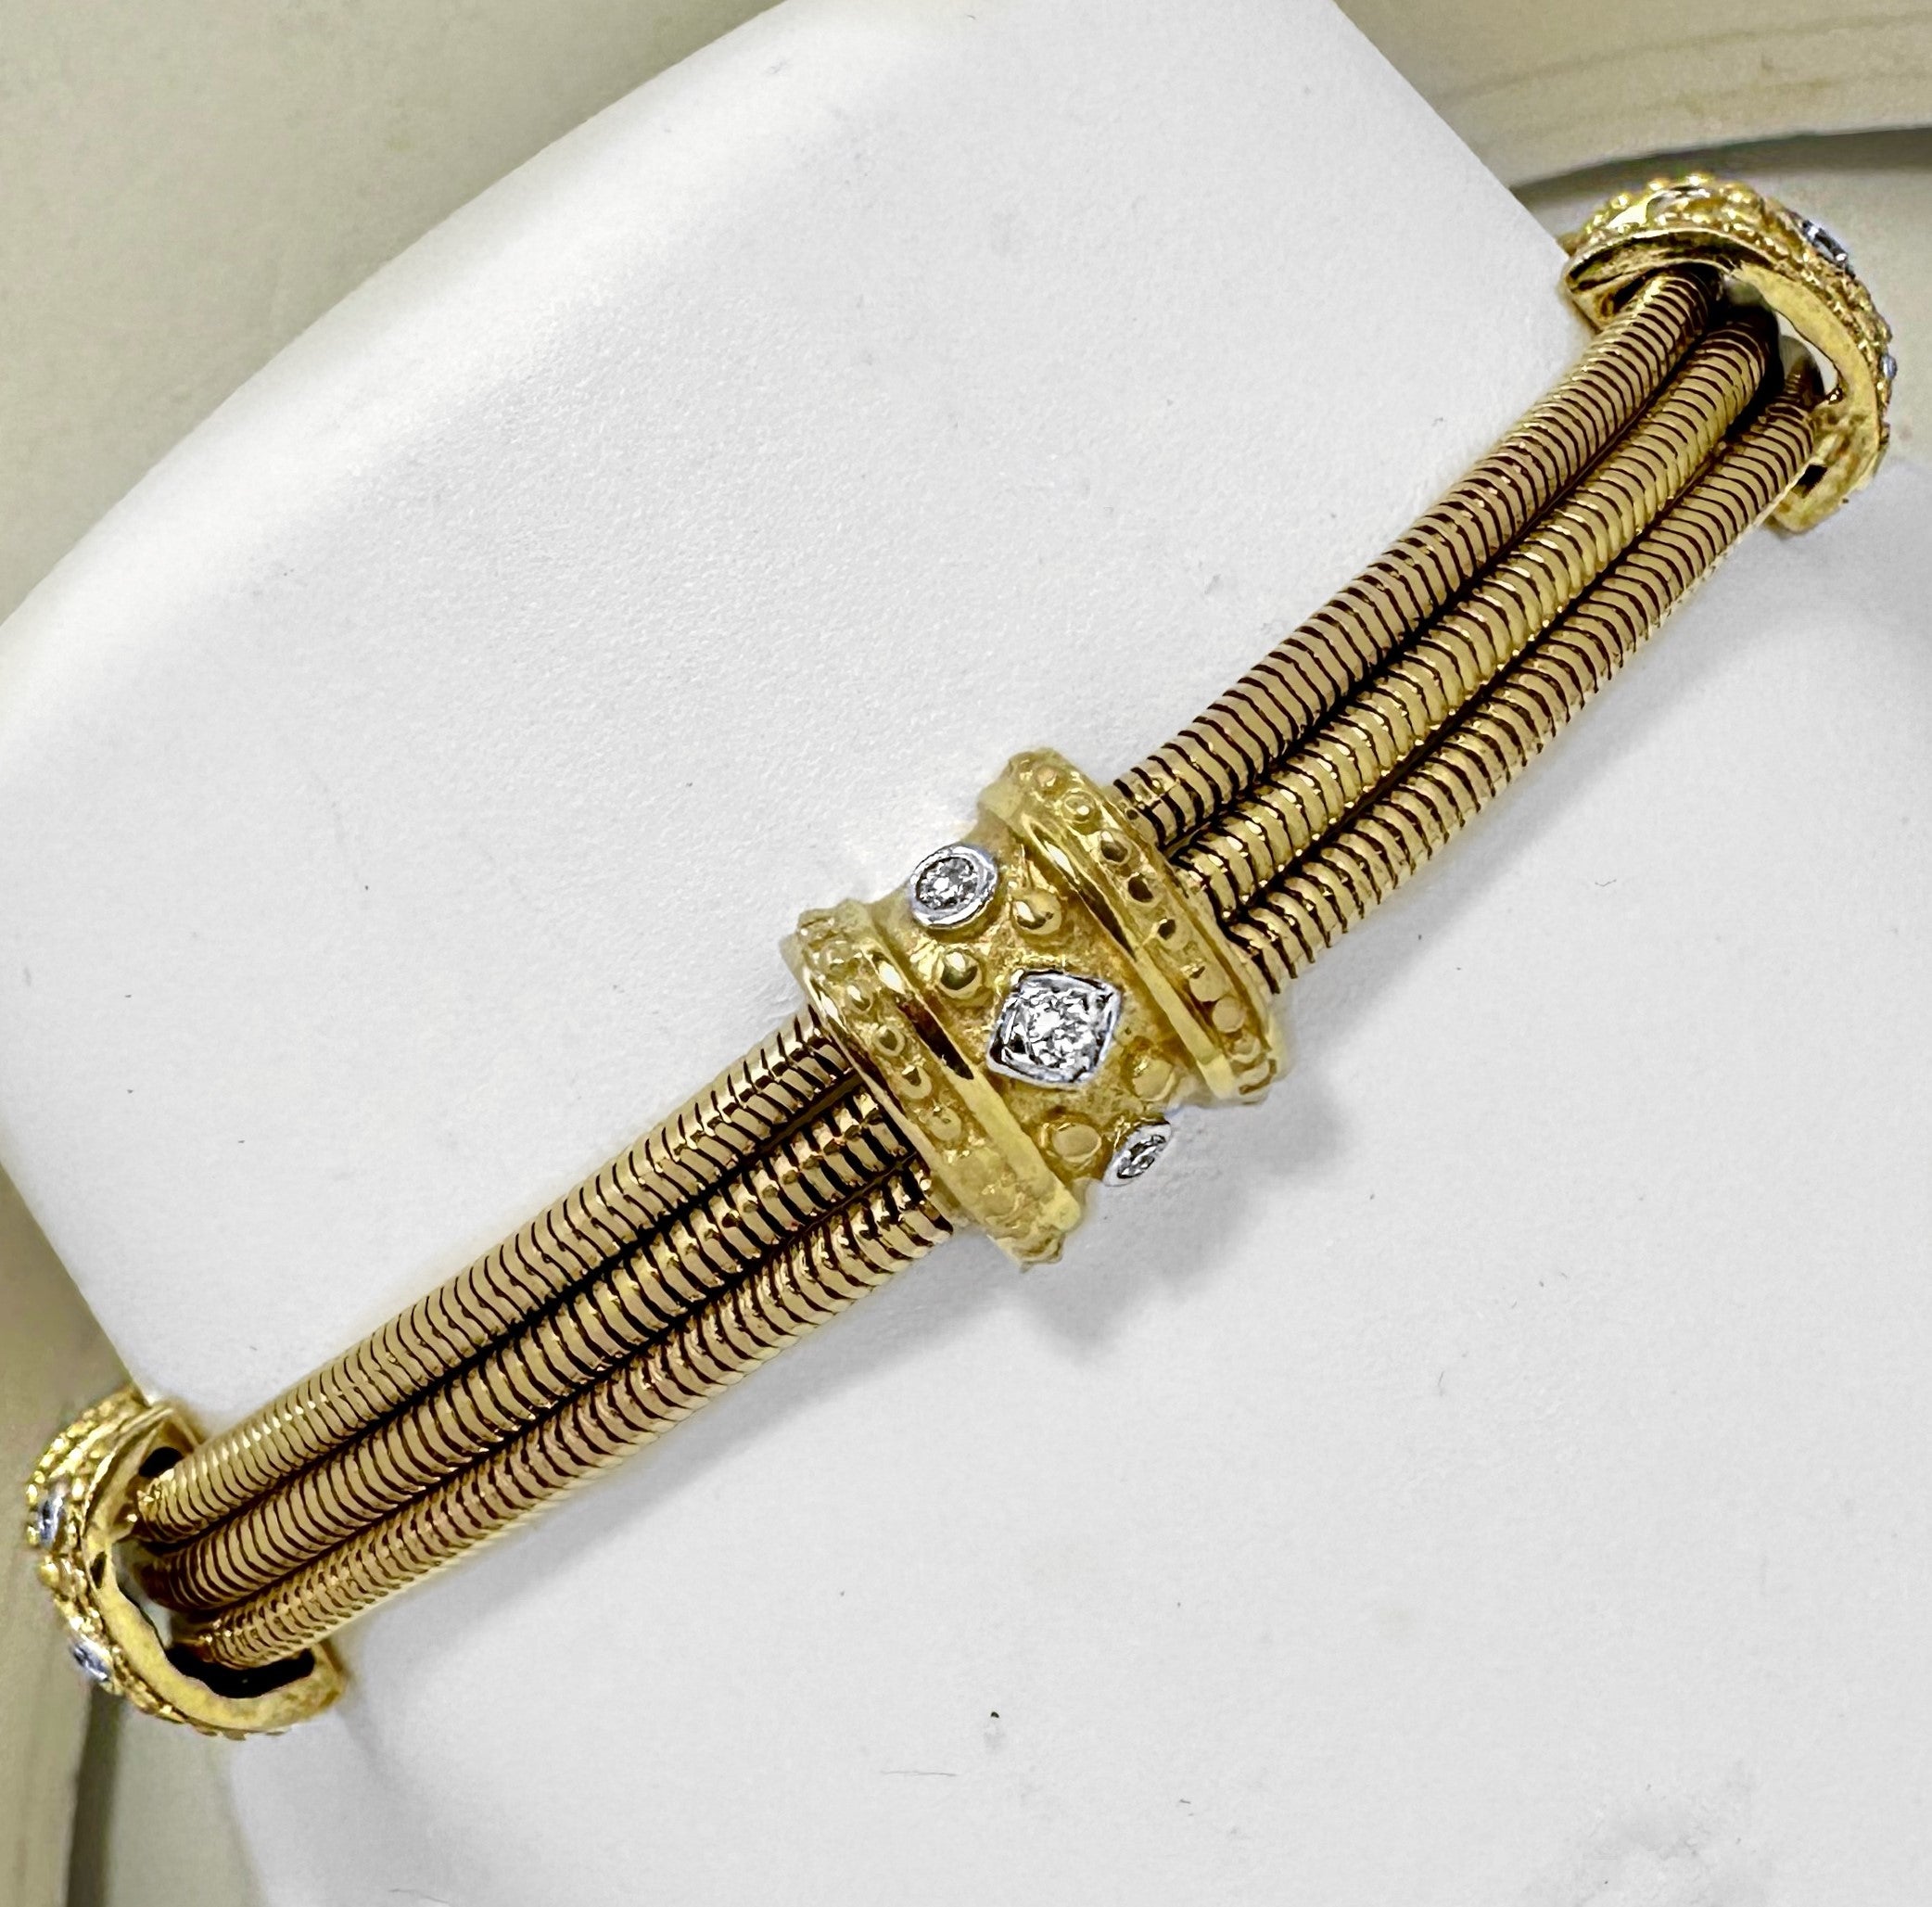 This very high quality Classic Revival style 14K yellow tri-strand snake chain bracelet is punctuated with five stations, each bezel set with three brilliant cut diamonds. Every station is finished in great detail with beaded edges and motifs